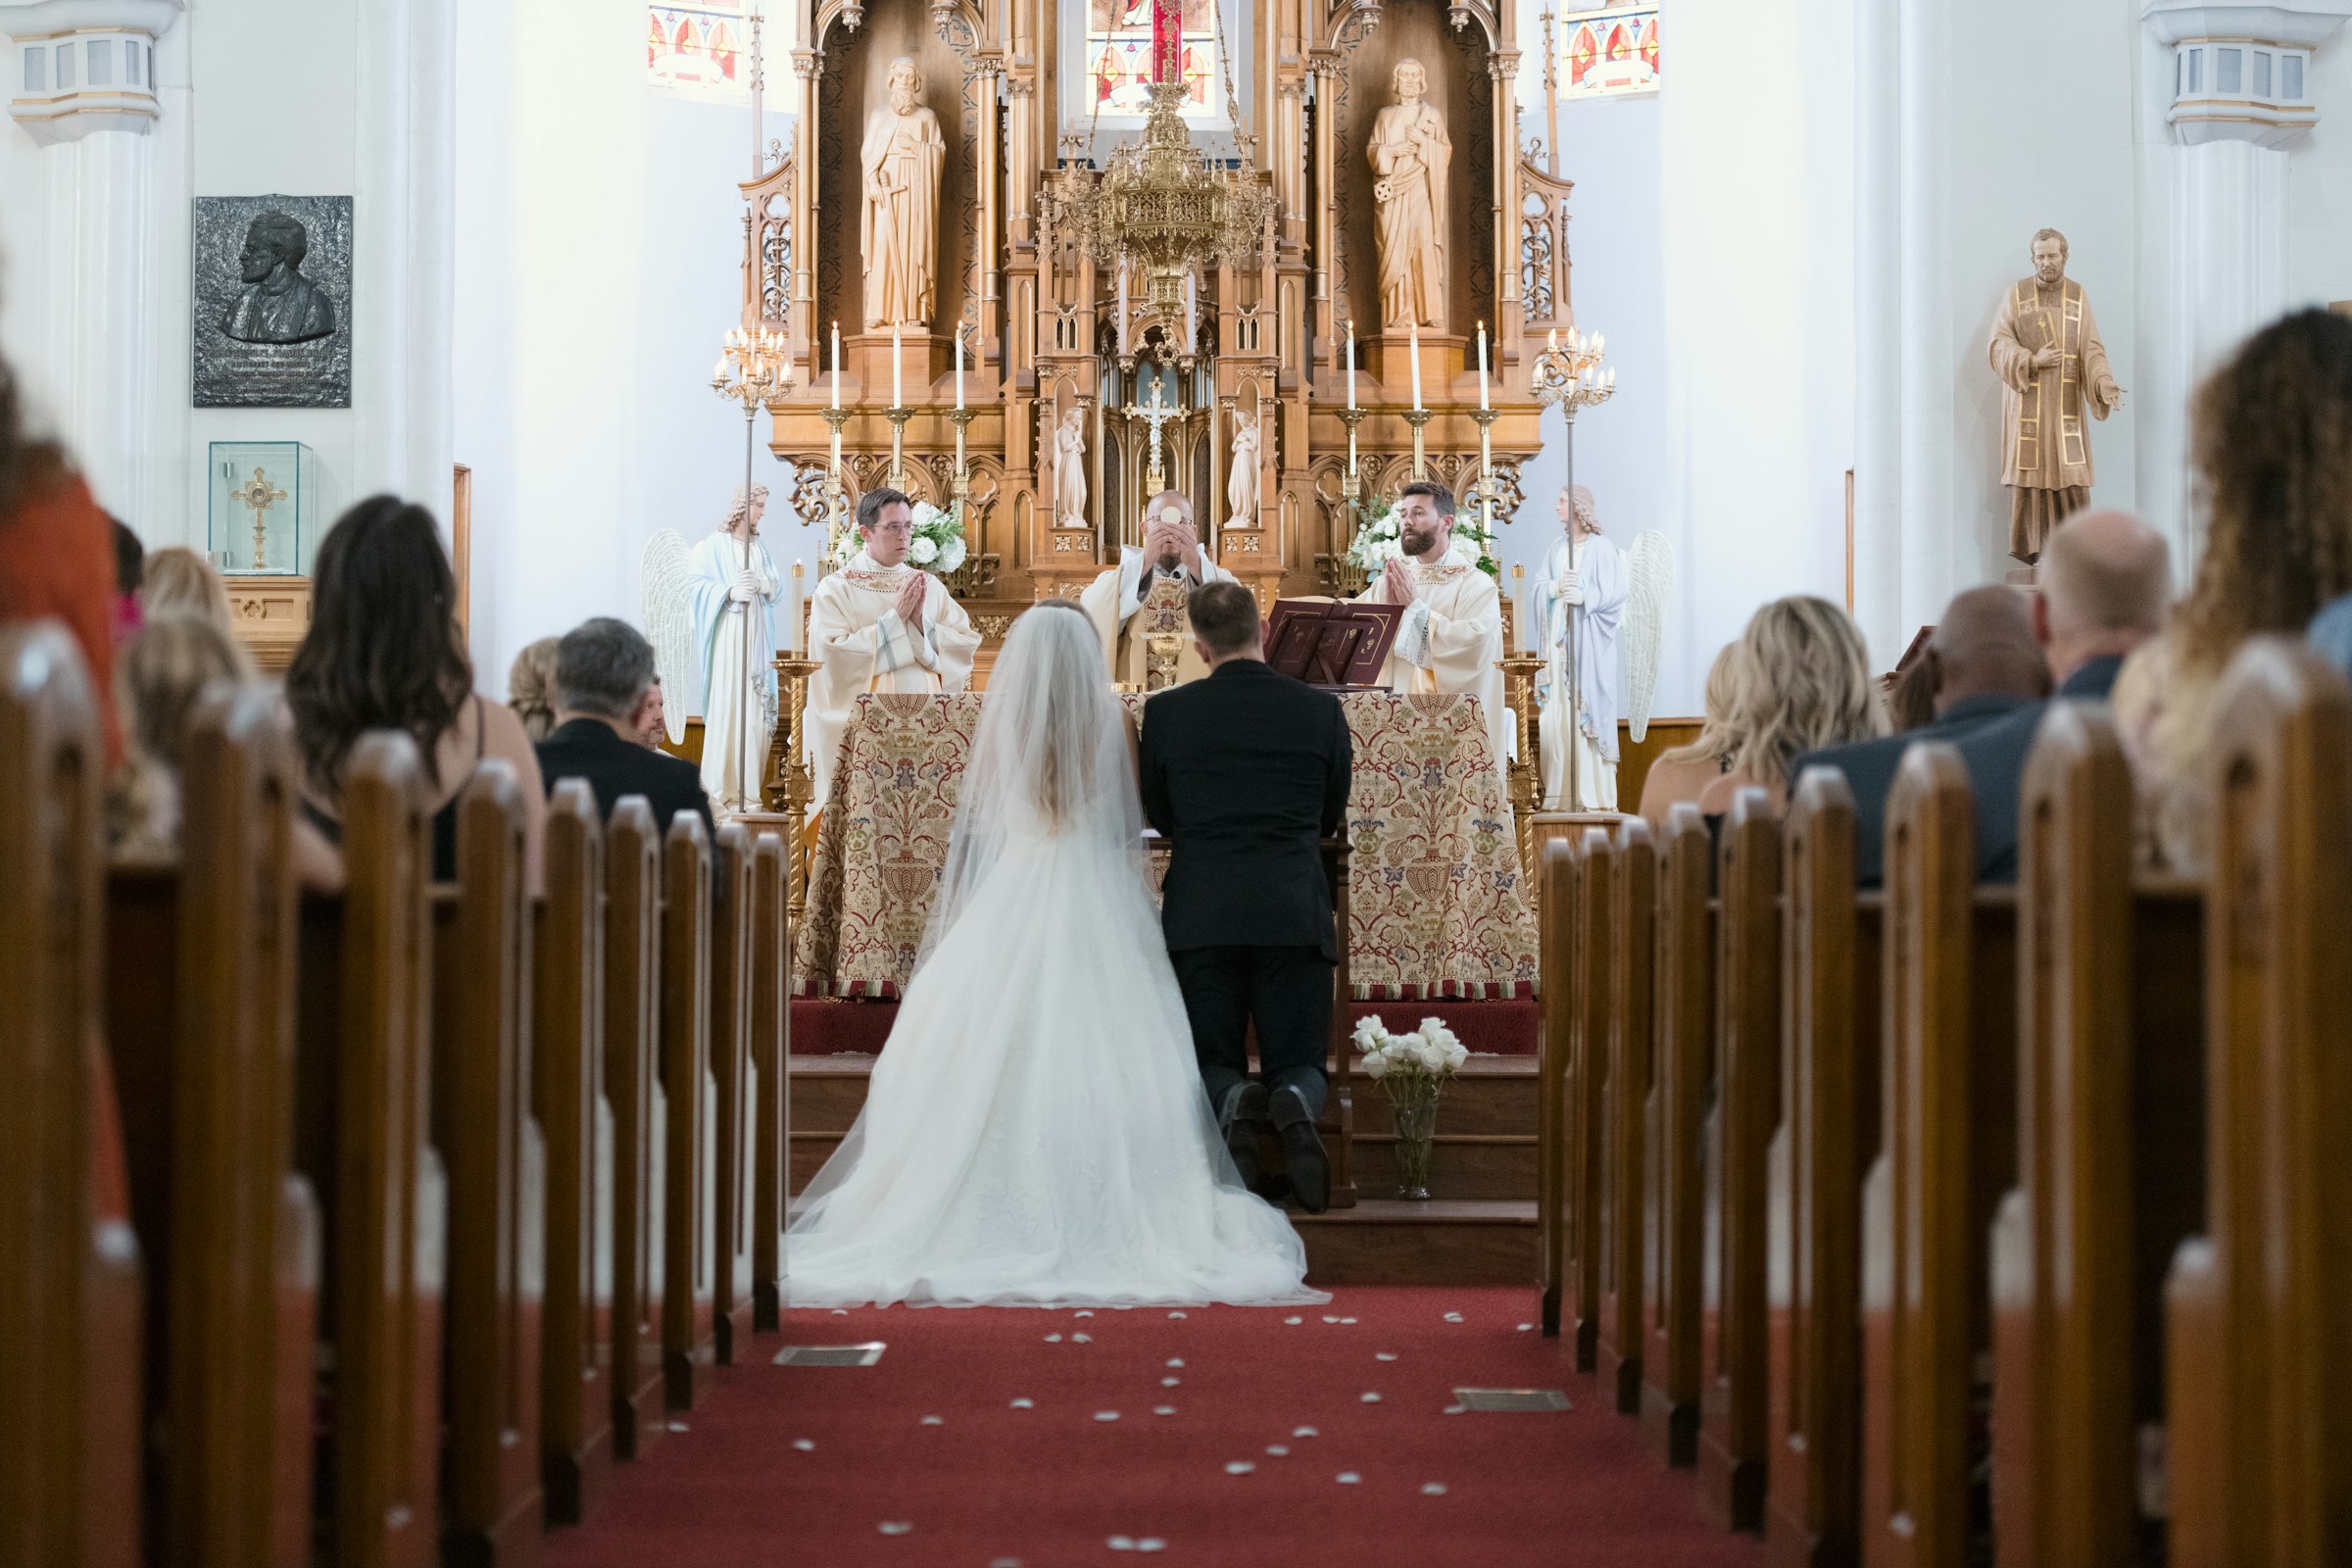 A bride and groom at the altar during a church wedding while the priest raises The Holy Sacrament | Source: Unsplash